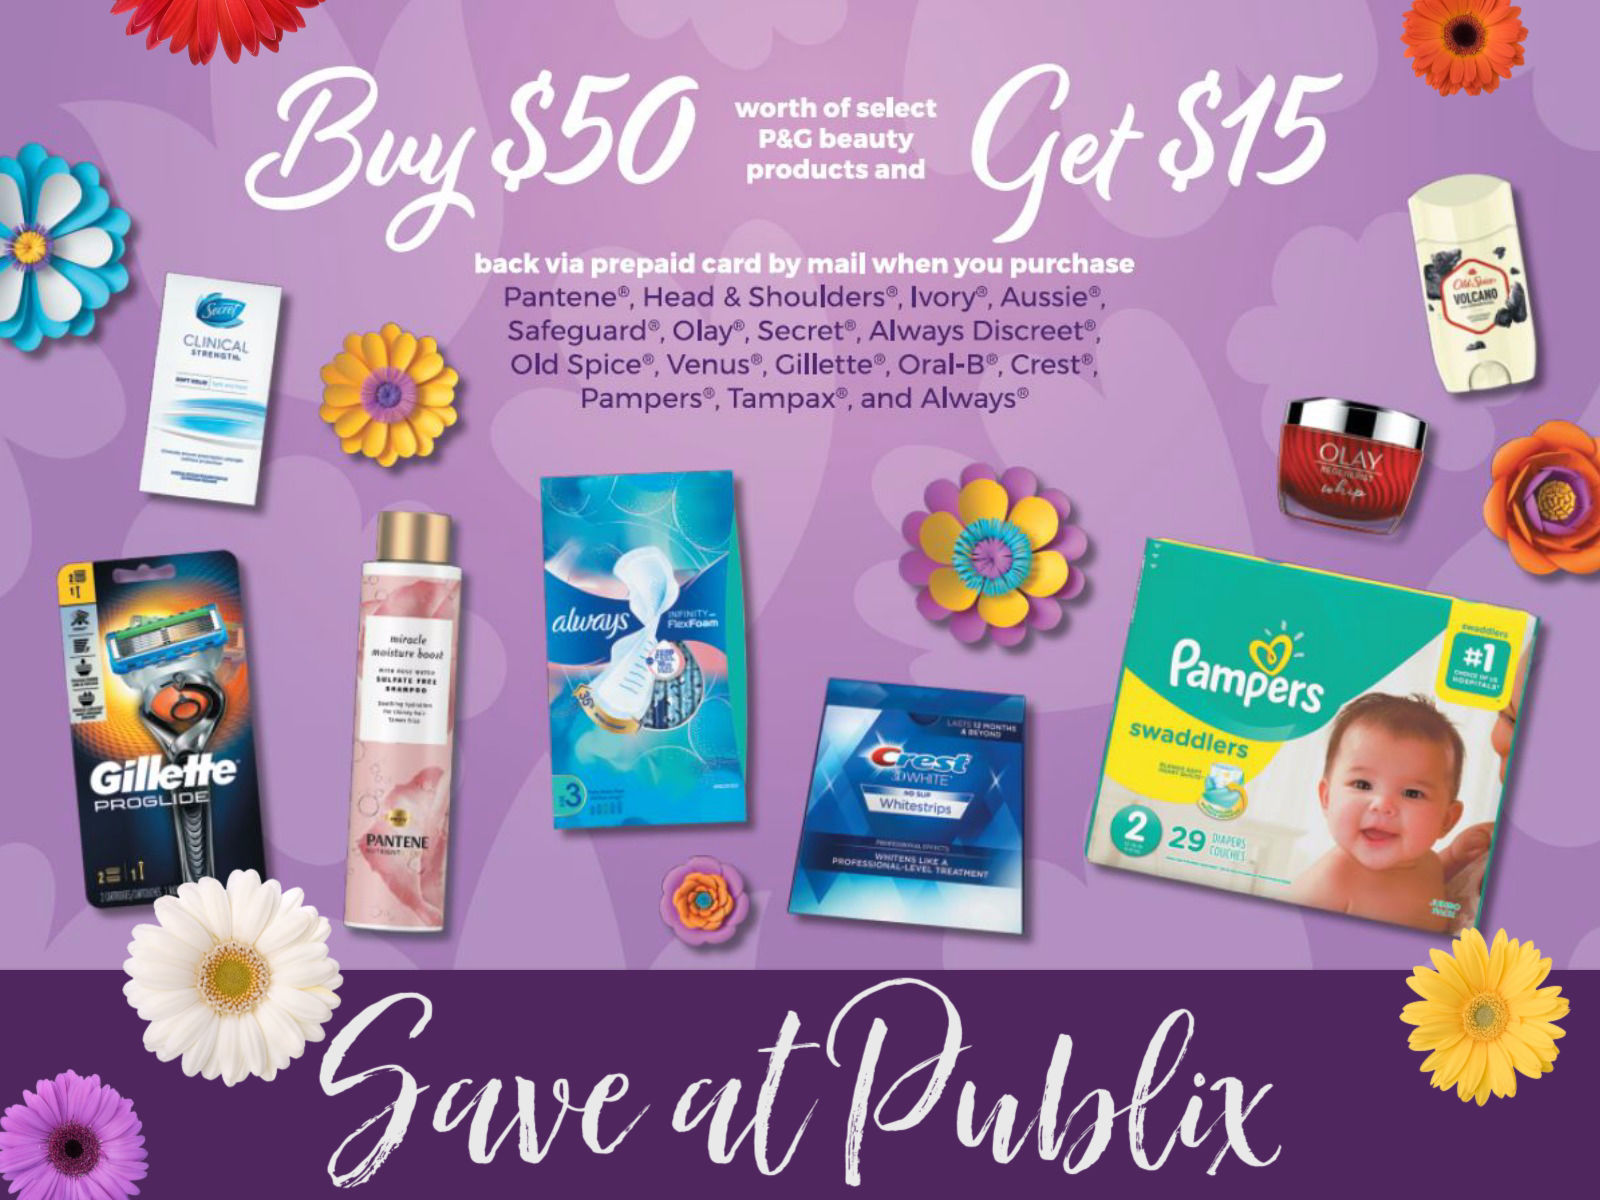 Fantastic Deals On Always & Tampax Products At Publix + Help To #EndPeriodPoverty!